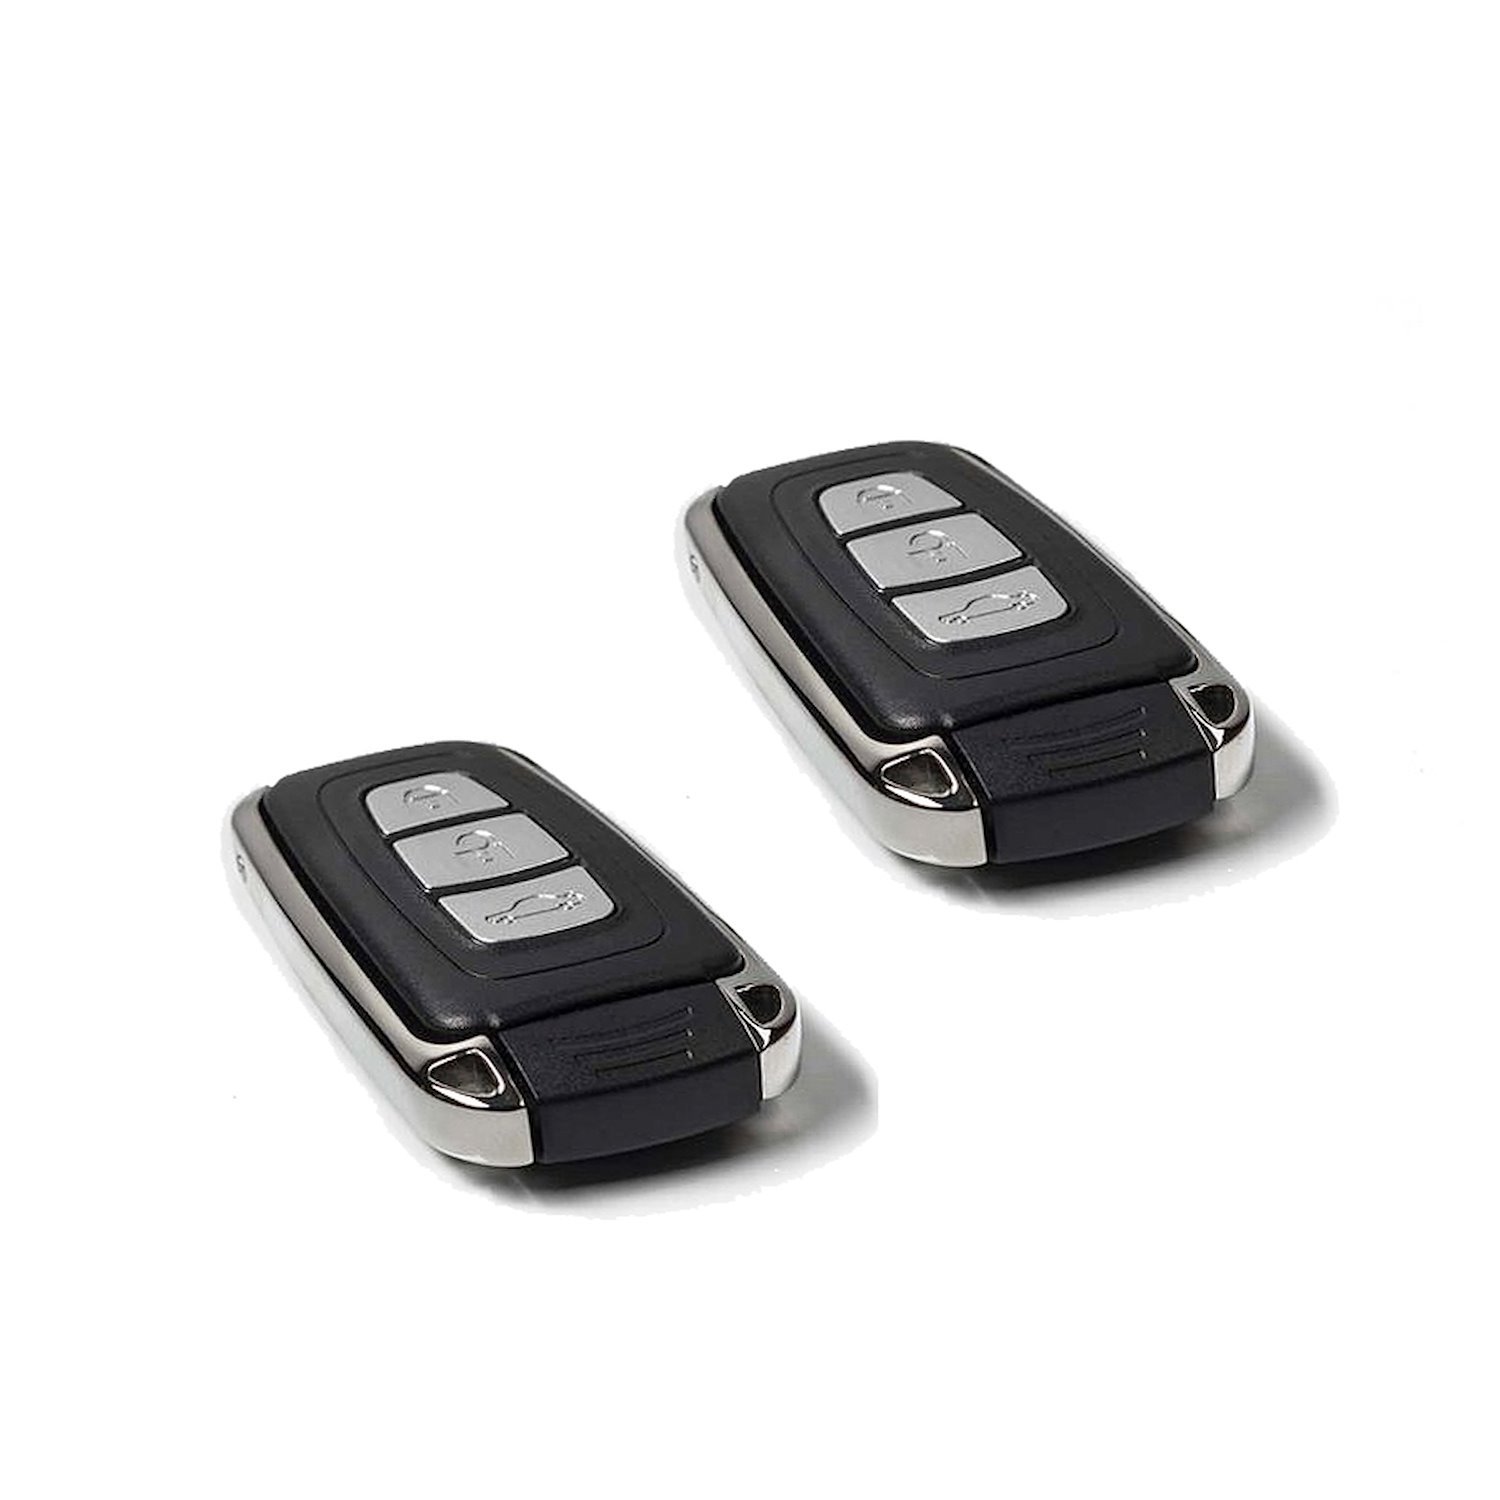 DGD-I-FOB Additional Key Fob for iKEY-O/iKEY-M Systems